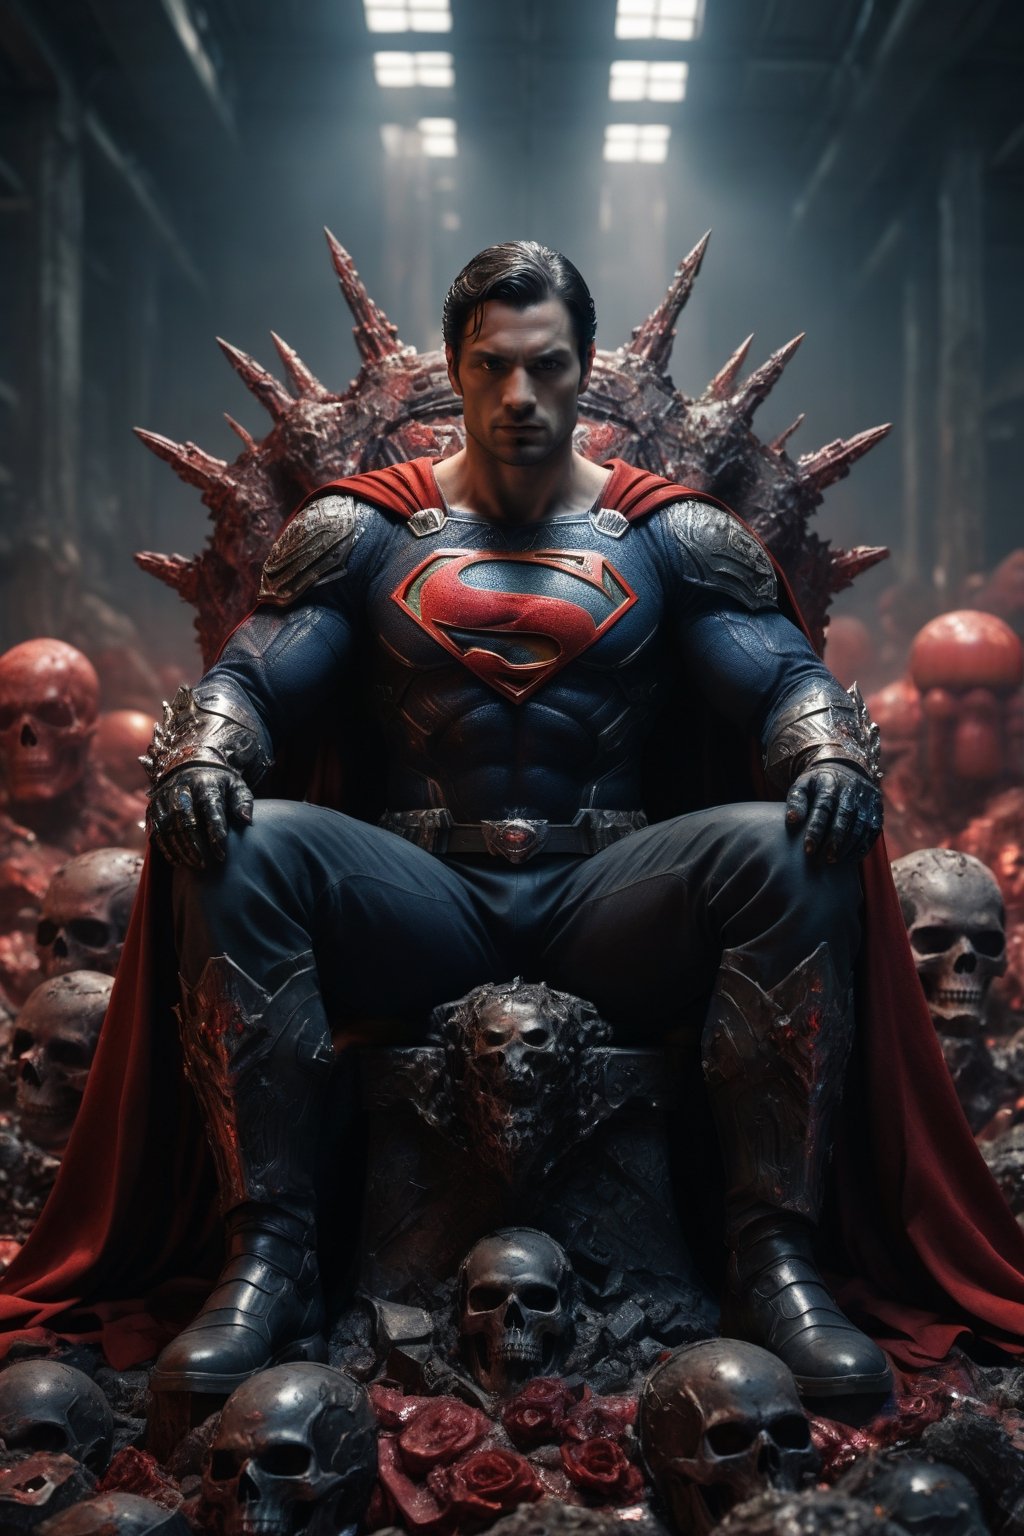 A legendary shot of superman in a dark and gritty setting. He is sitting on a throne of skulls, surrounded by the detritus of battle. The pose is dynamic and engaging, with superman looking directly at the viewer. The colors are vibrant and saturated, with a strong emphasis on red and black. The level of detail is incredible, with every skull and every piece of armor rendered in stunning realism. The image has been post-processed to add even more detail and atmosphere. The overall effect is one of ultra-realism and cinematic quality.

